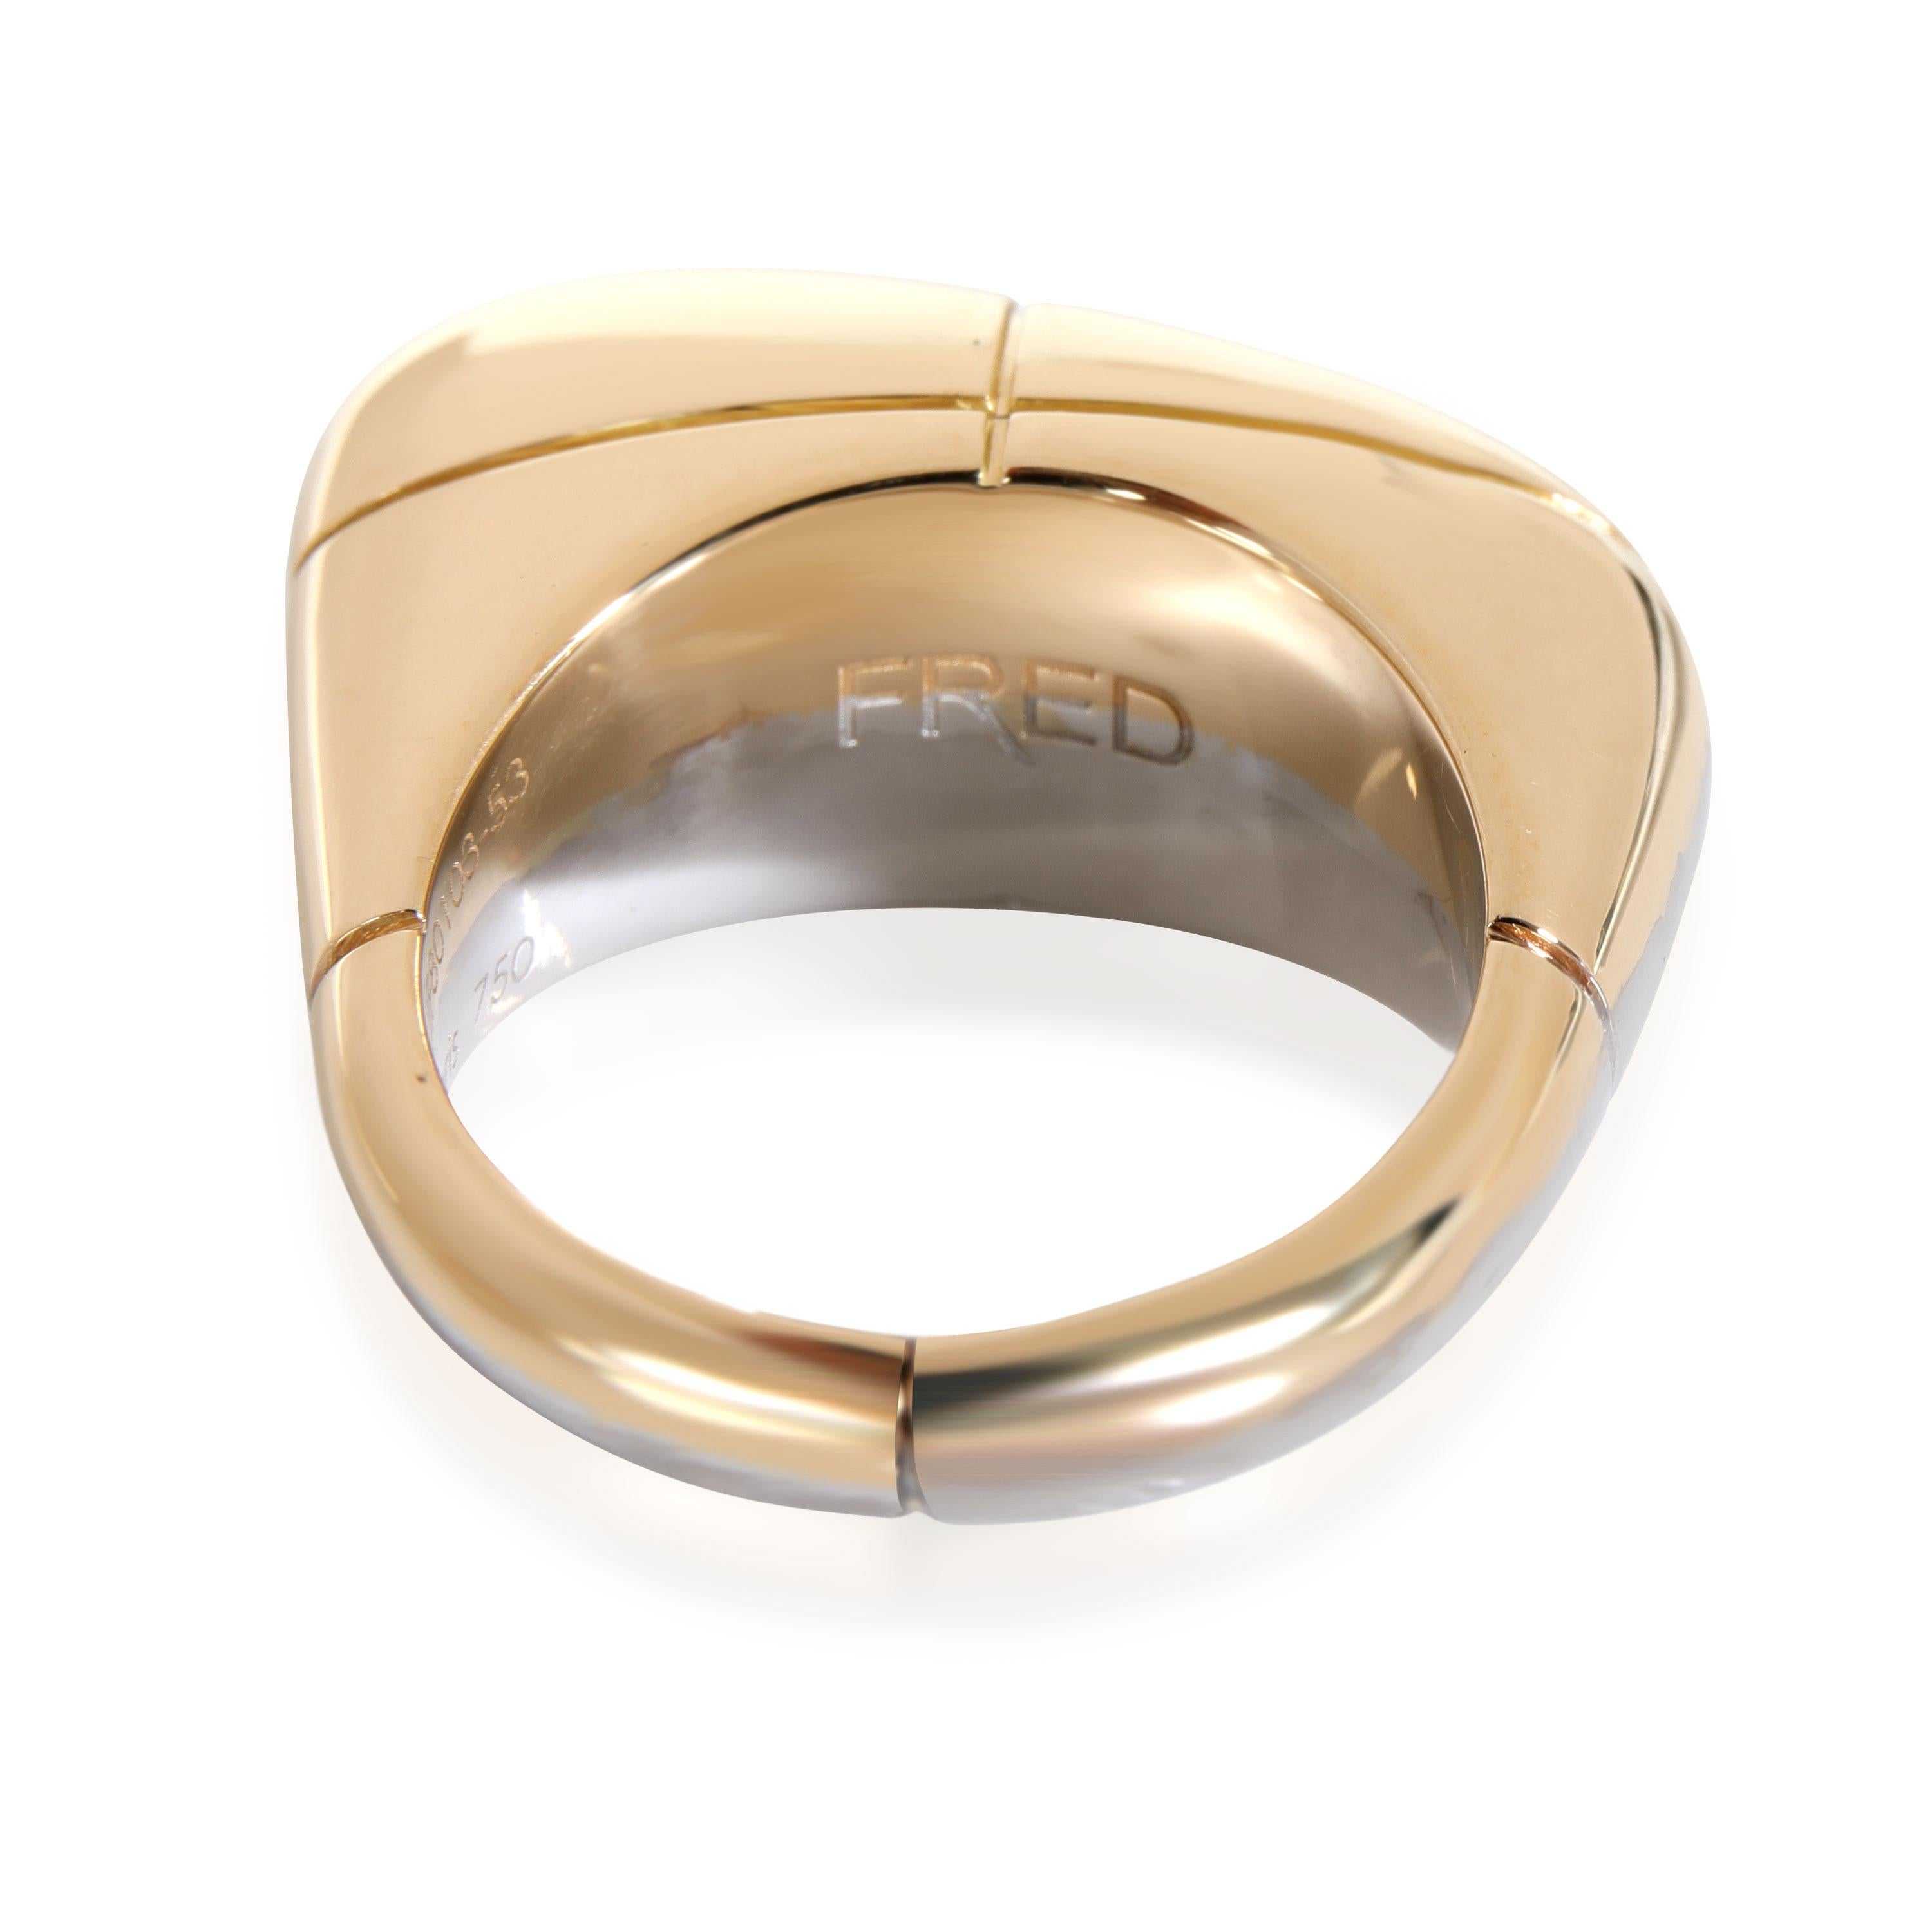 FRED Paris Ring in 18k 2 Tone Gold

PRIMARY DETAILS
SKU: 114718
Listing Title: FRED Paris Ring in 18k 2 Tone Gold
Condition Description: Retails for 4885 USD. In excellent condition and recently polished. Ring size is 6.5.Comes with Box.
Brand: